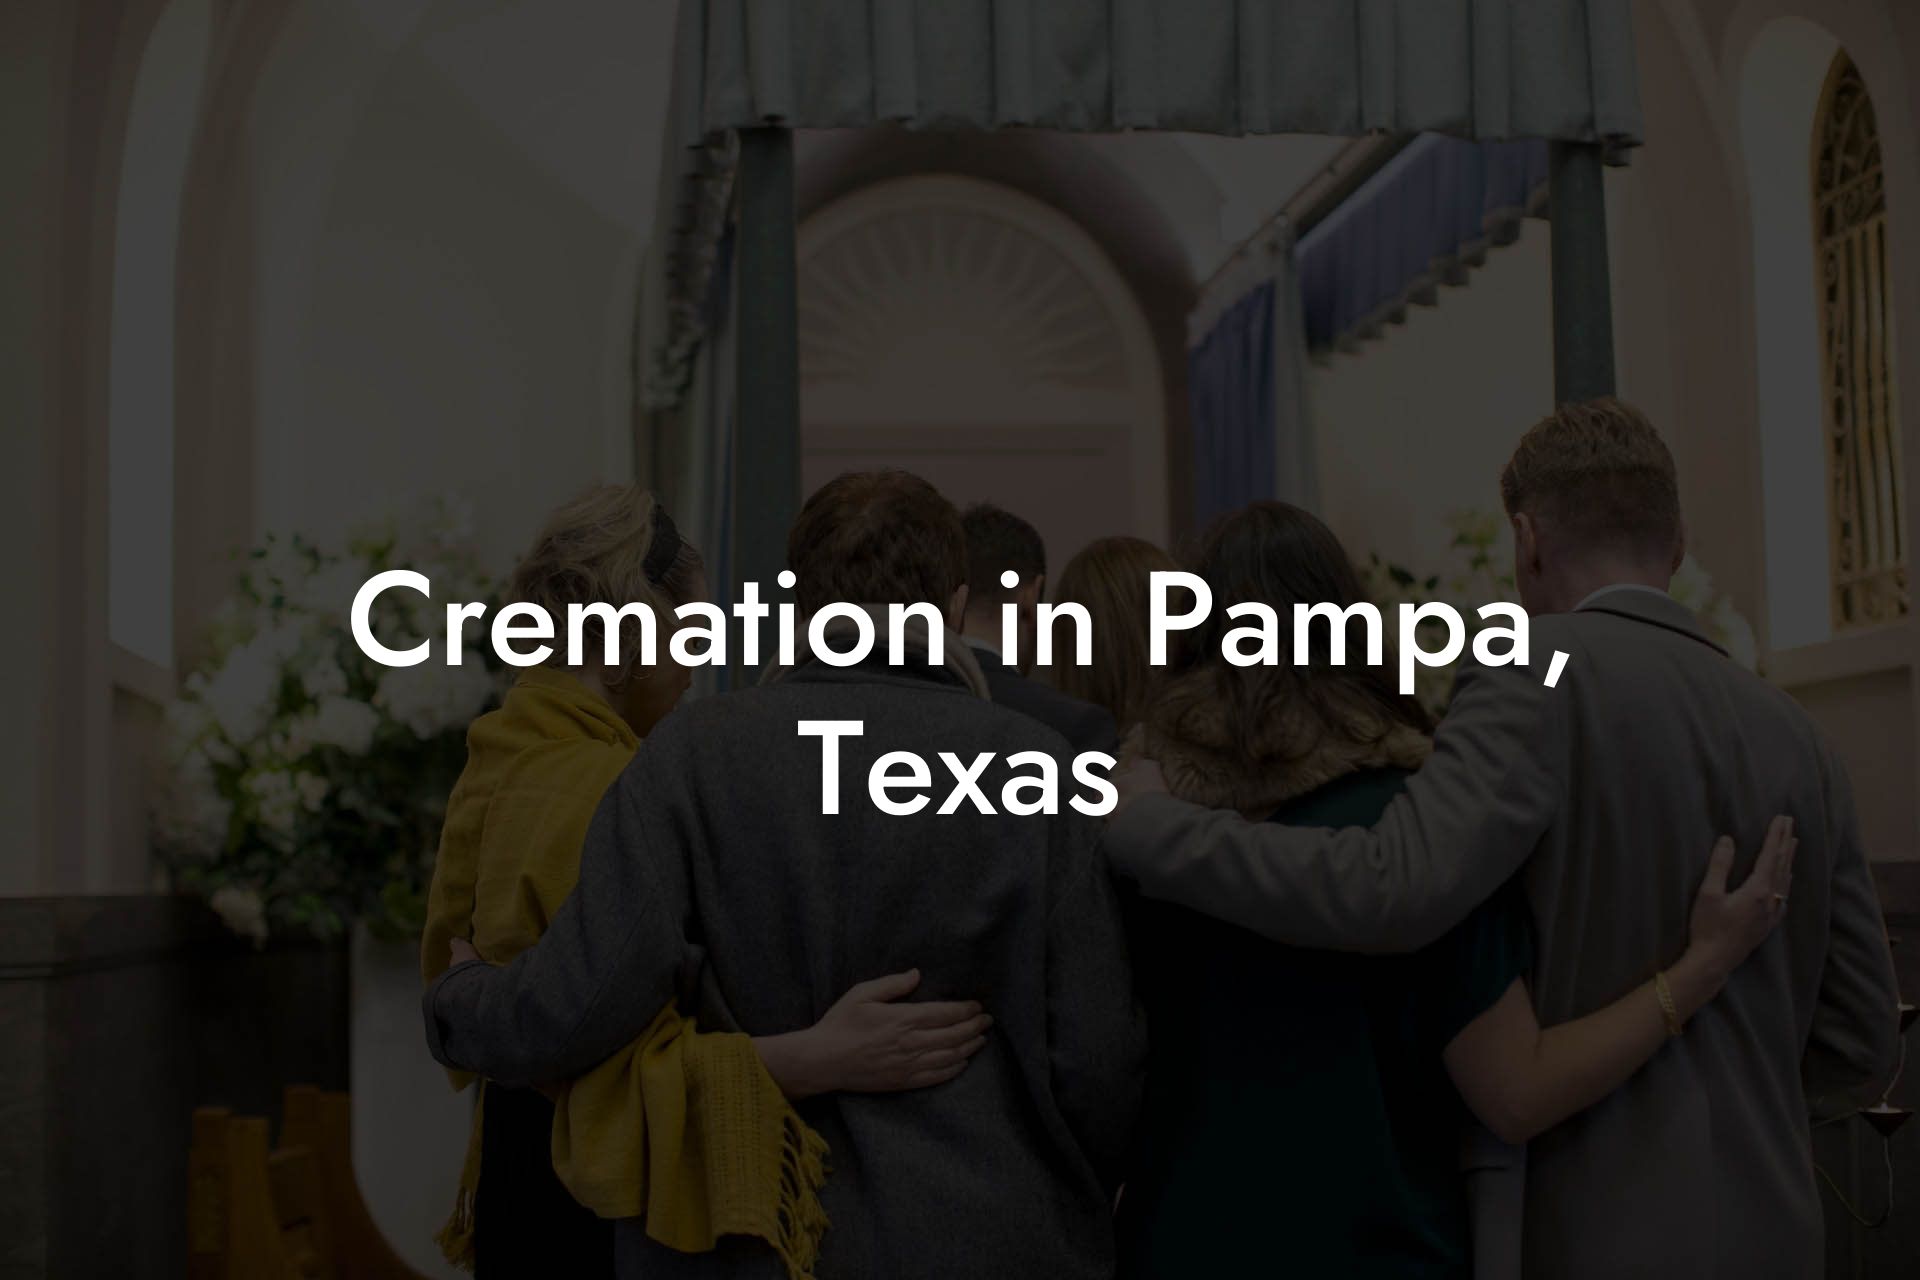 Cremation in Pampa, Texas